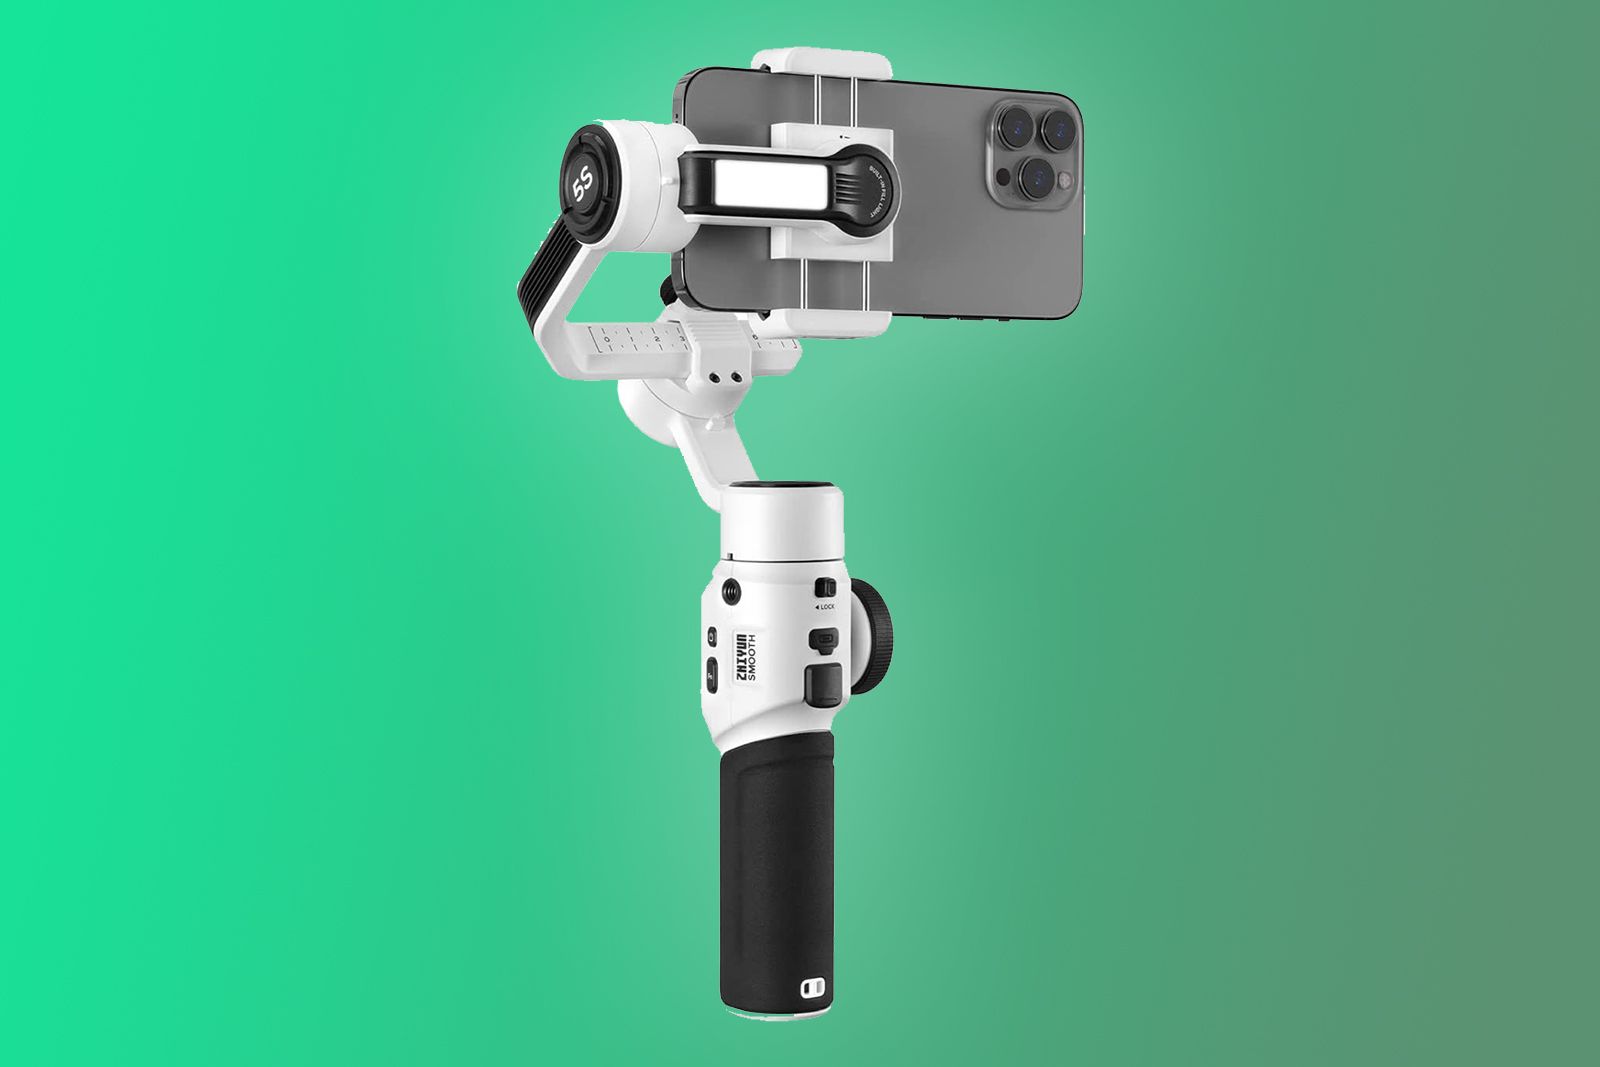 Zhiyun Smooth 5S vs DJI Osmo Mobile 6: Which smartphone gimbal is right for you?